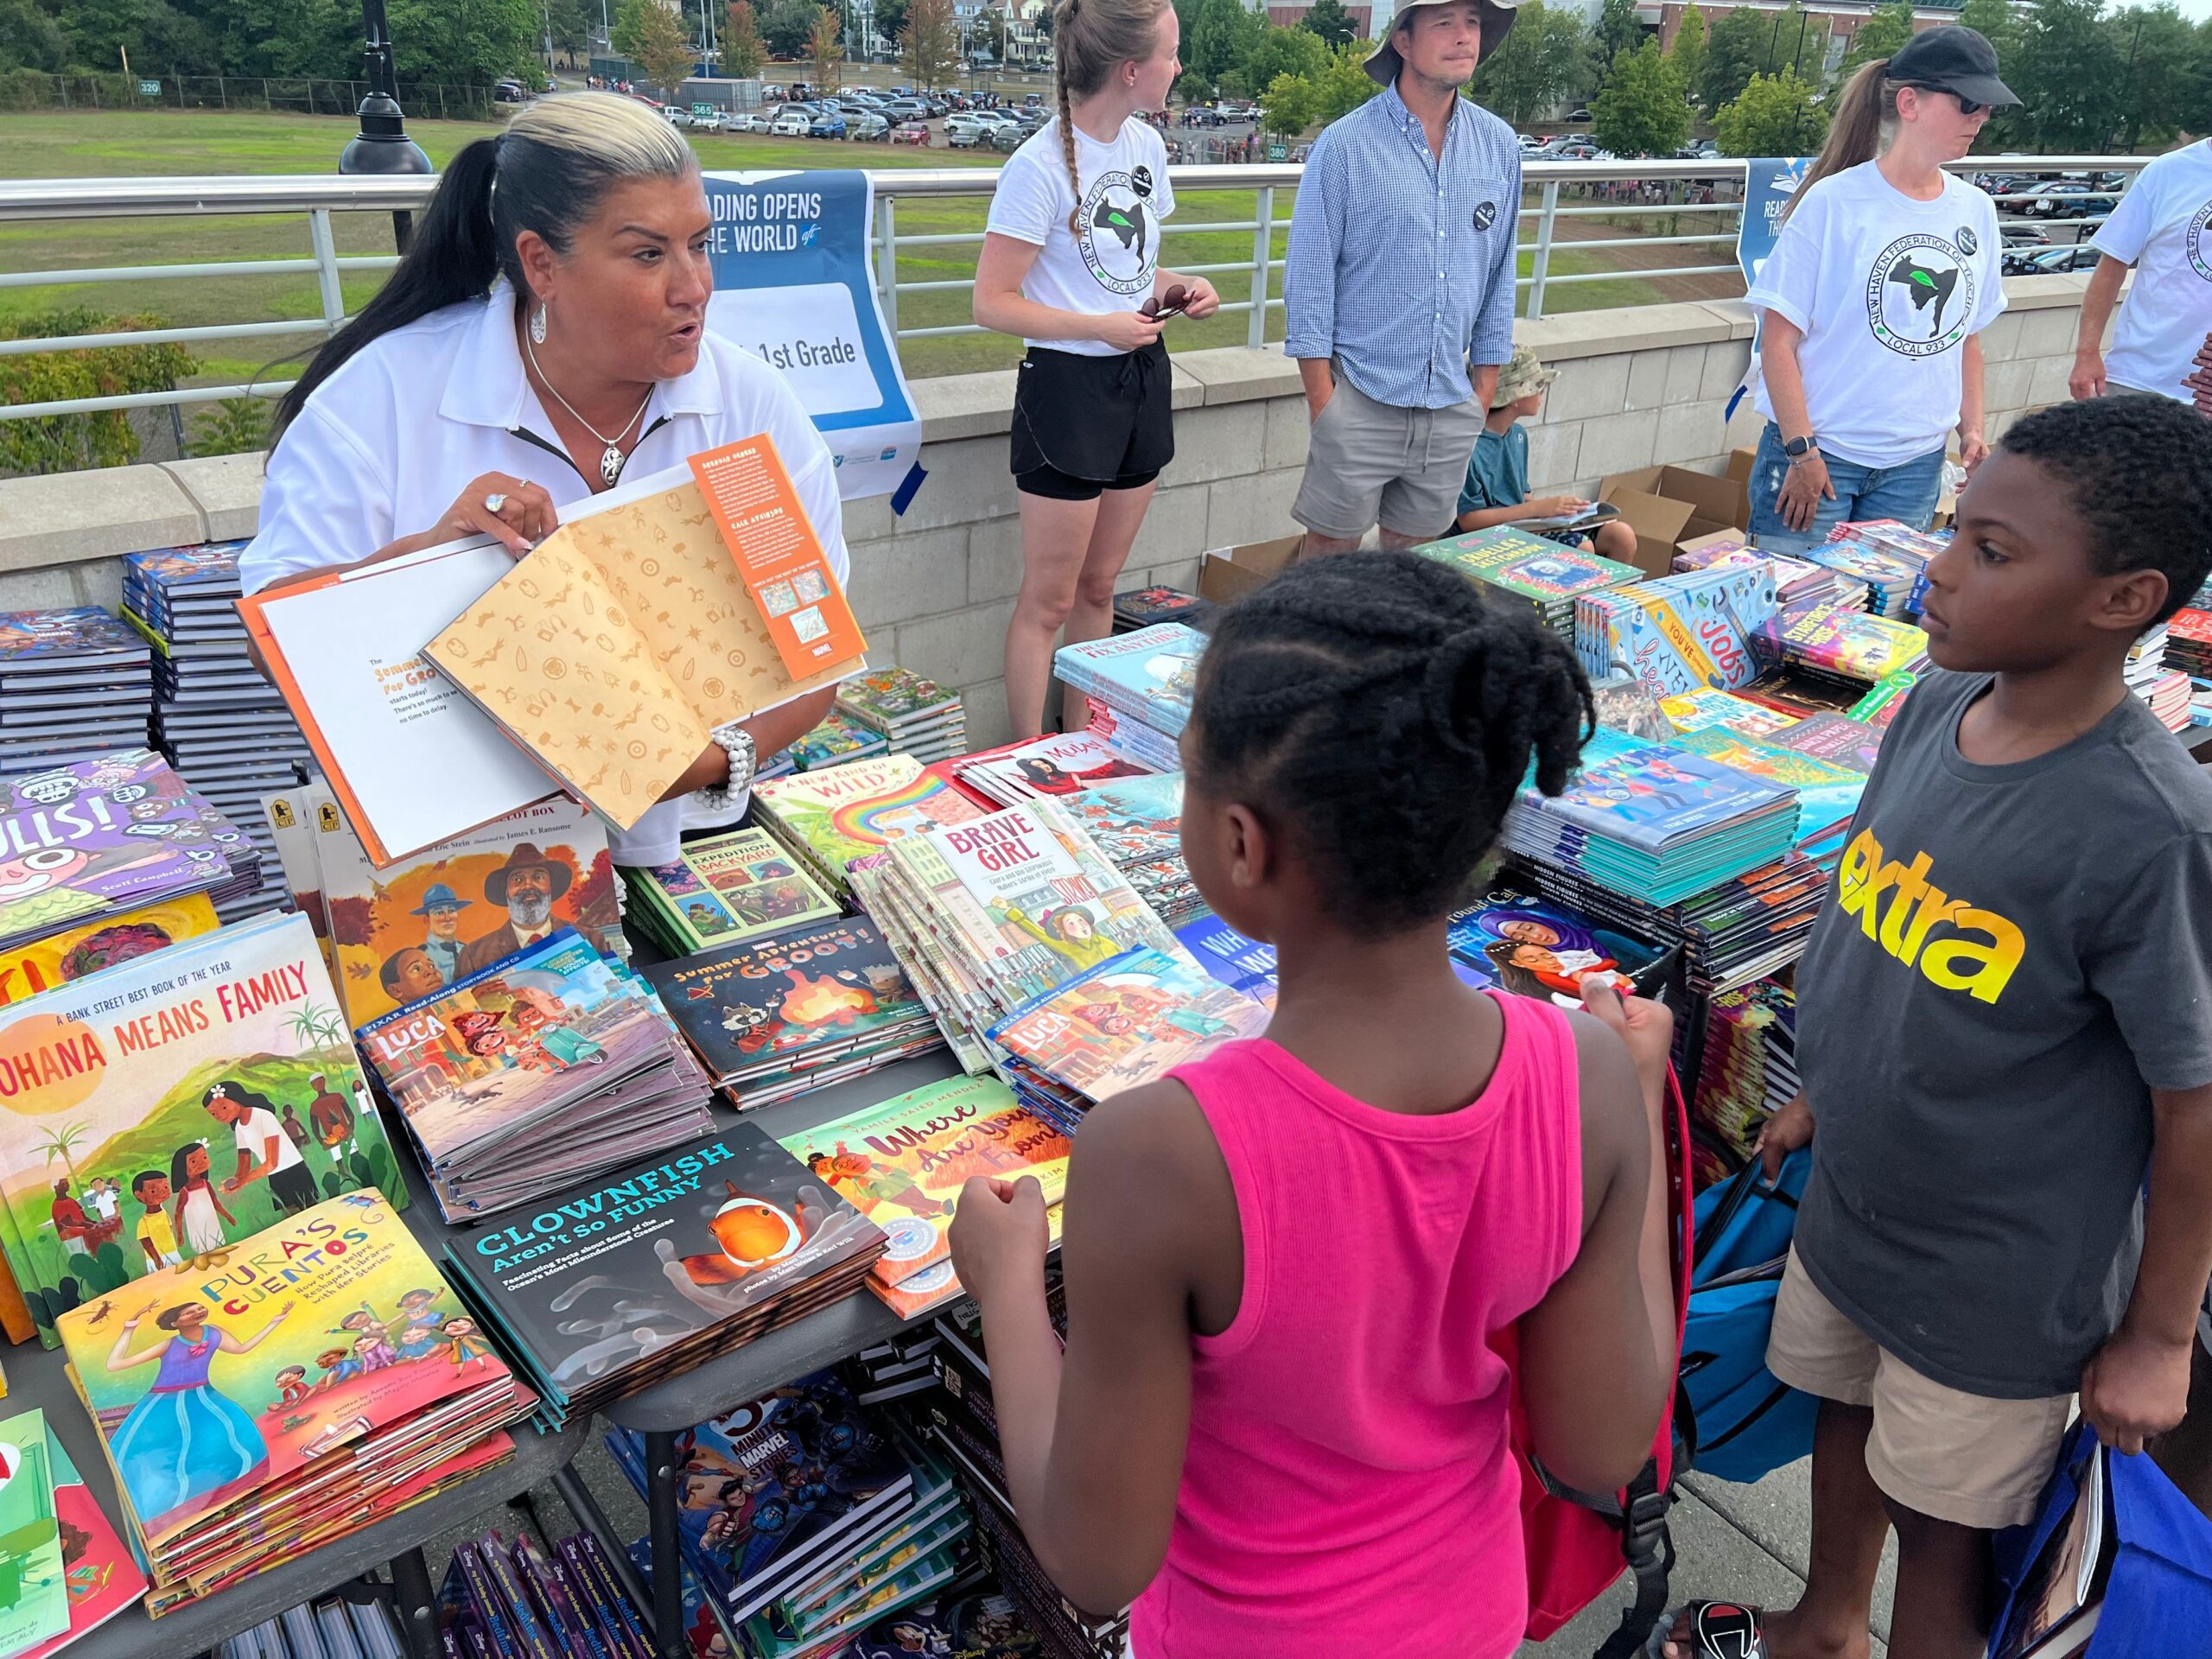 AFT volunteer shows book to two kids at a table full of books.